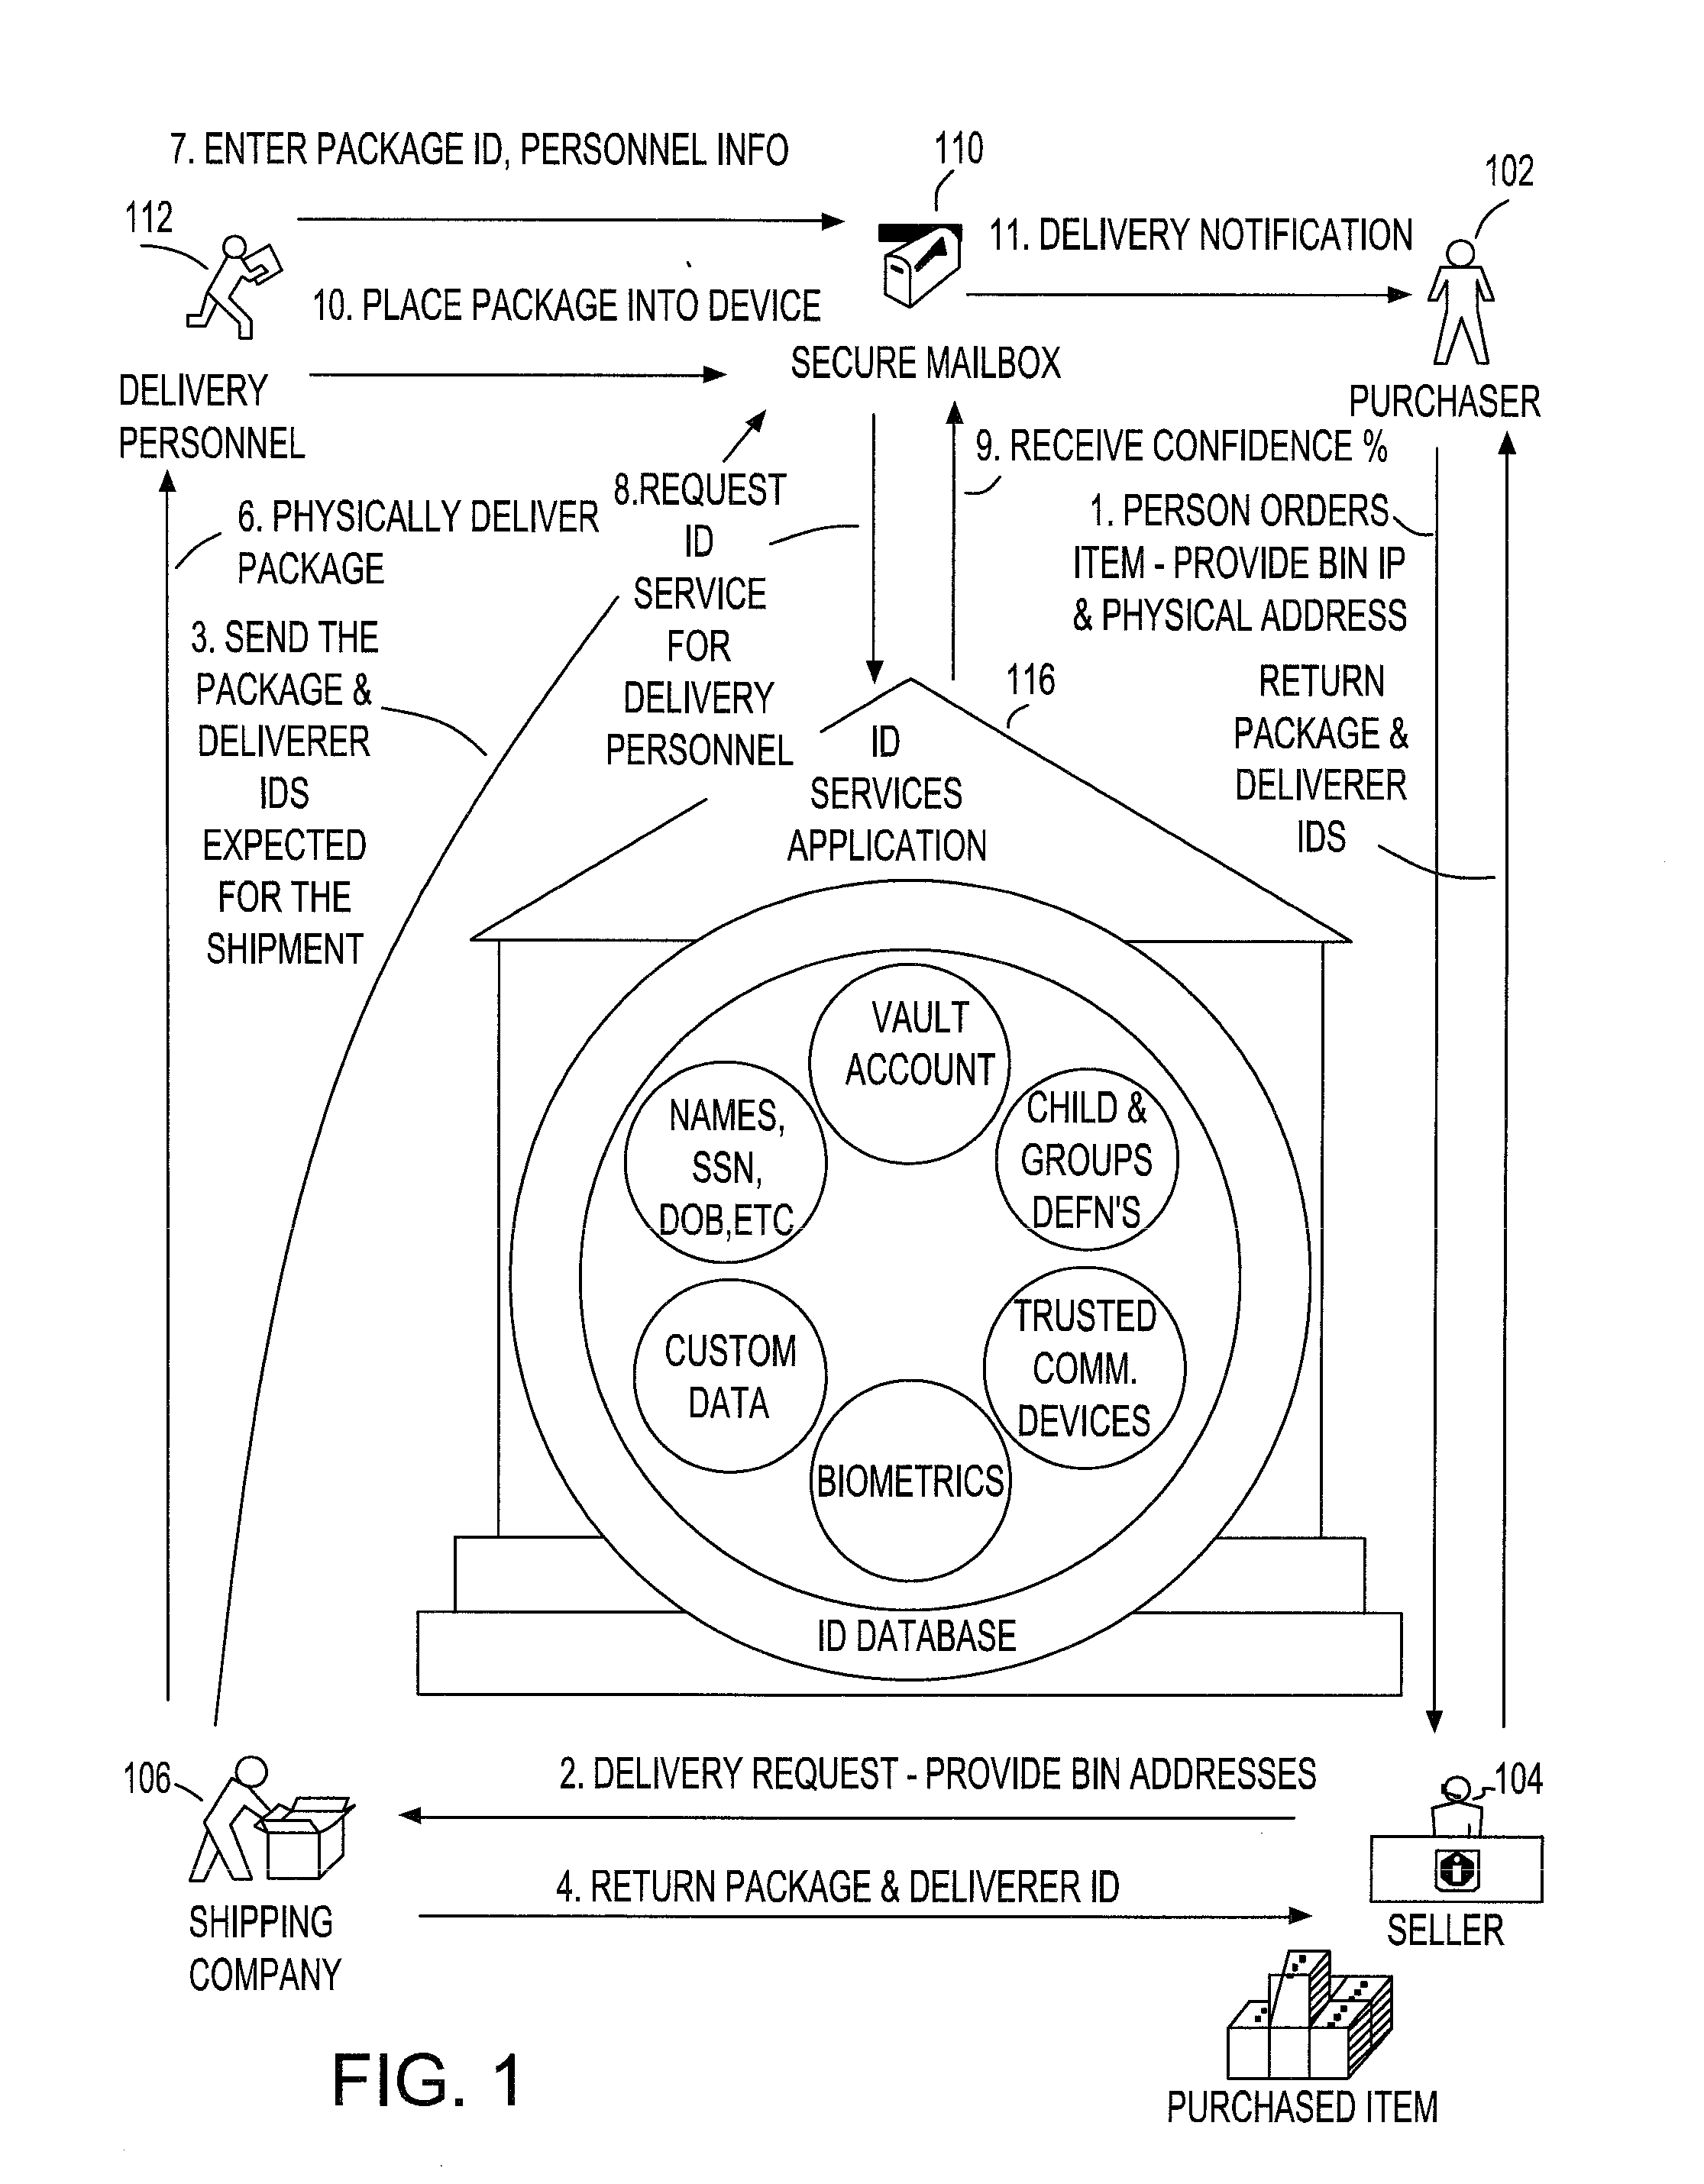 System and method to enhance security surrounding package delivery